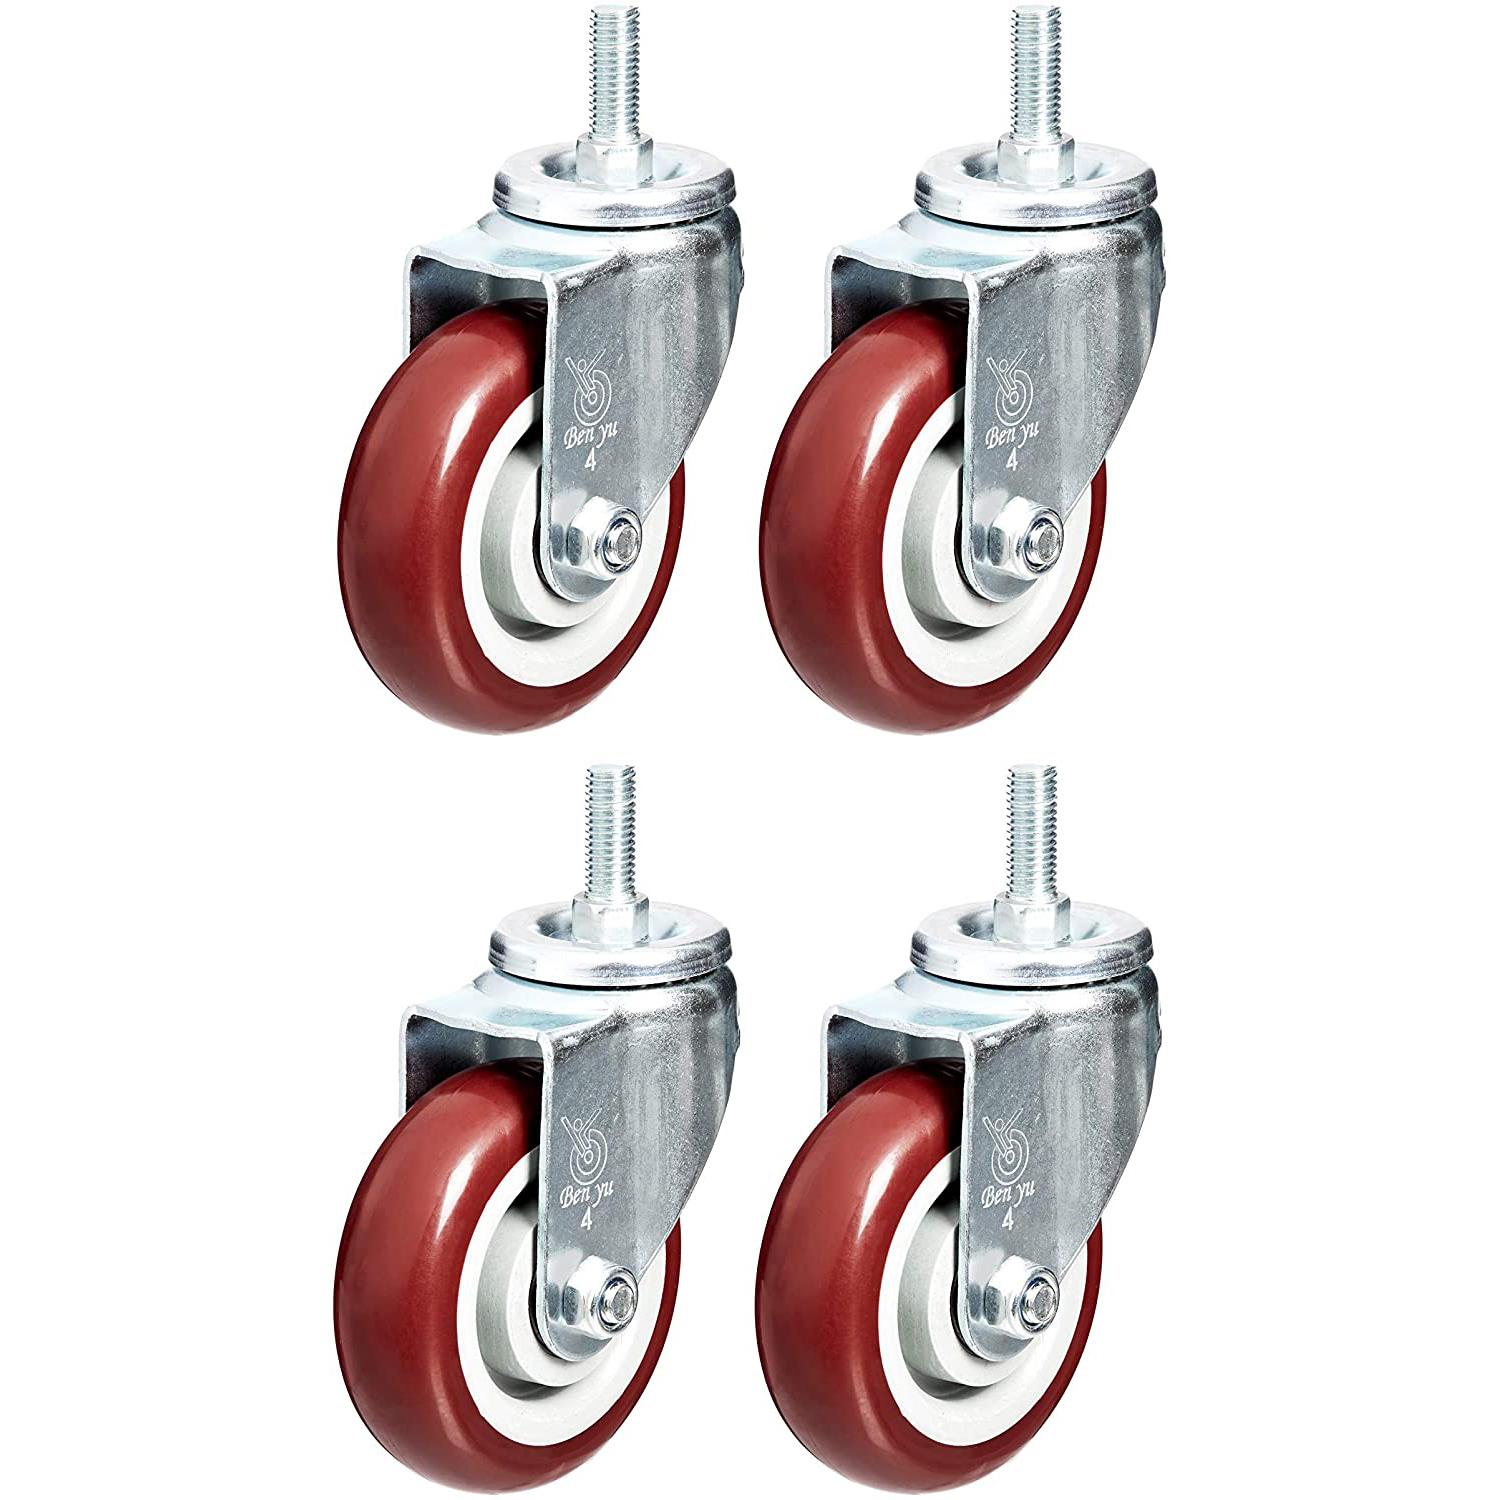 4-Pack AmazonCommercial 4in PVC Swivel Casters for $8.20